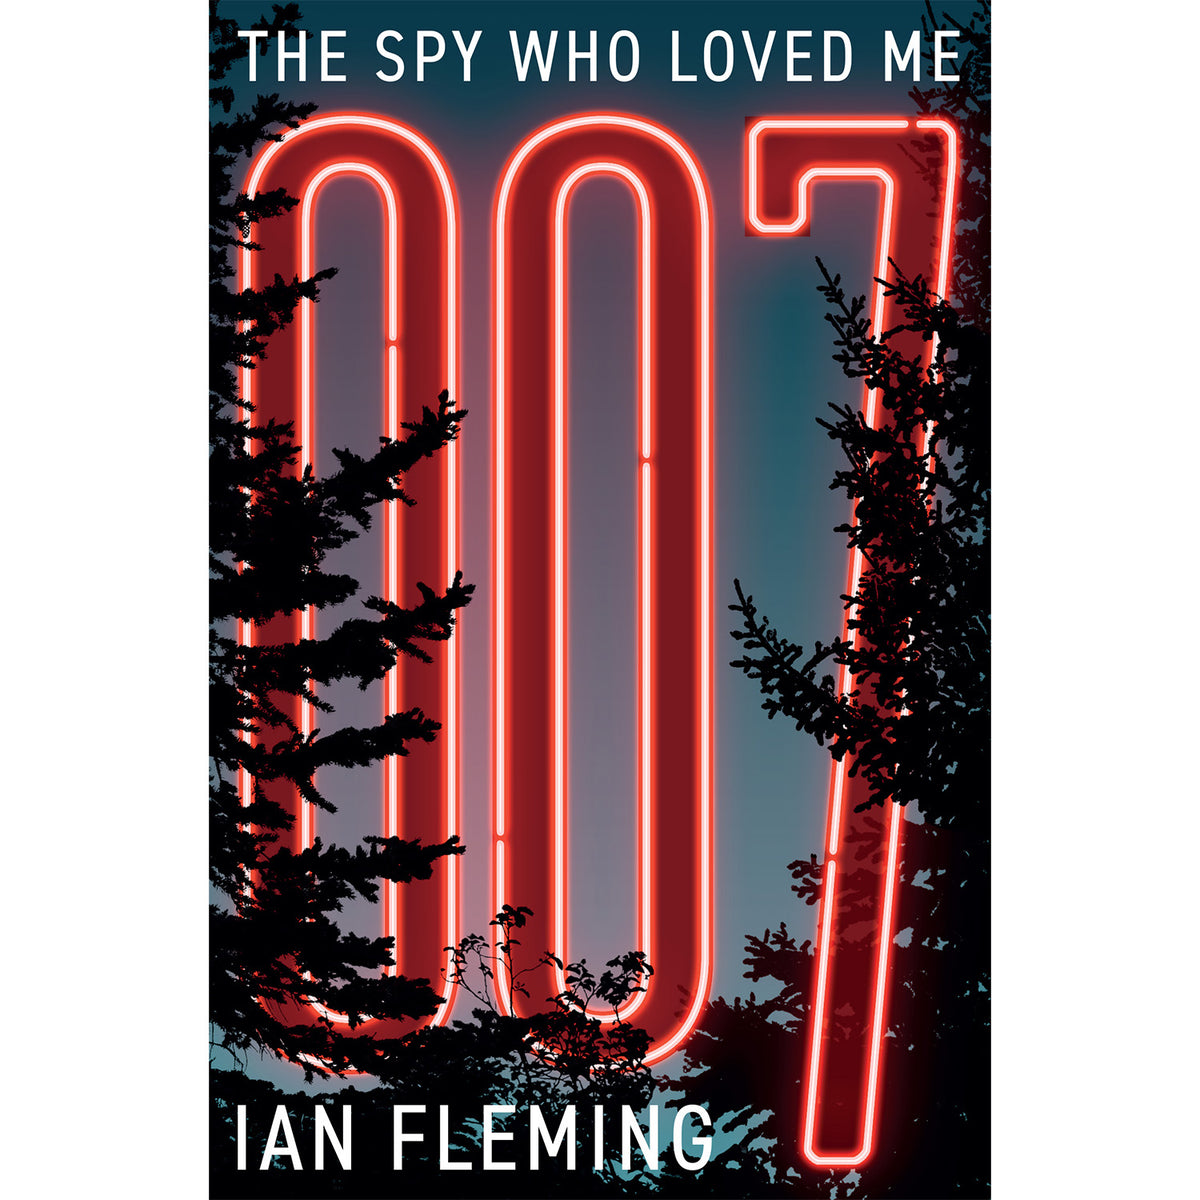 James Bond The Spy Who Loved Me Book - By Ian Fleming